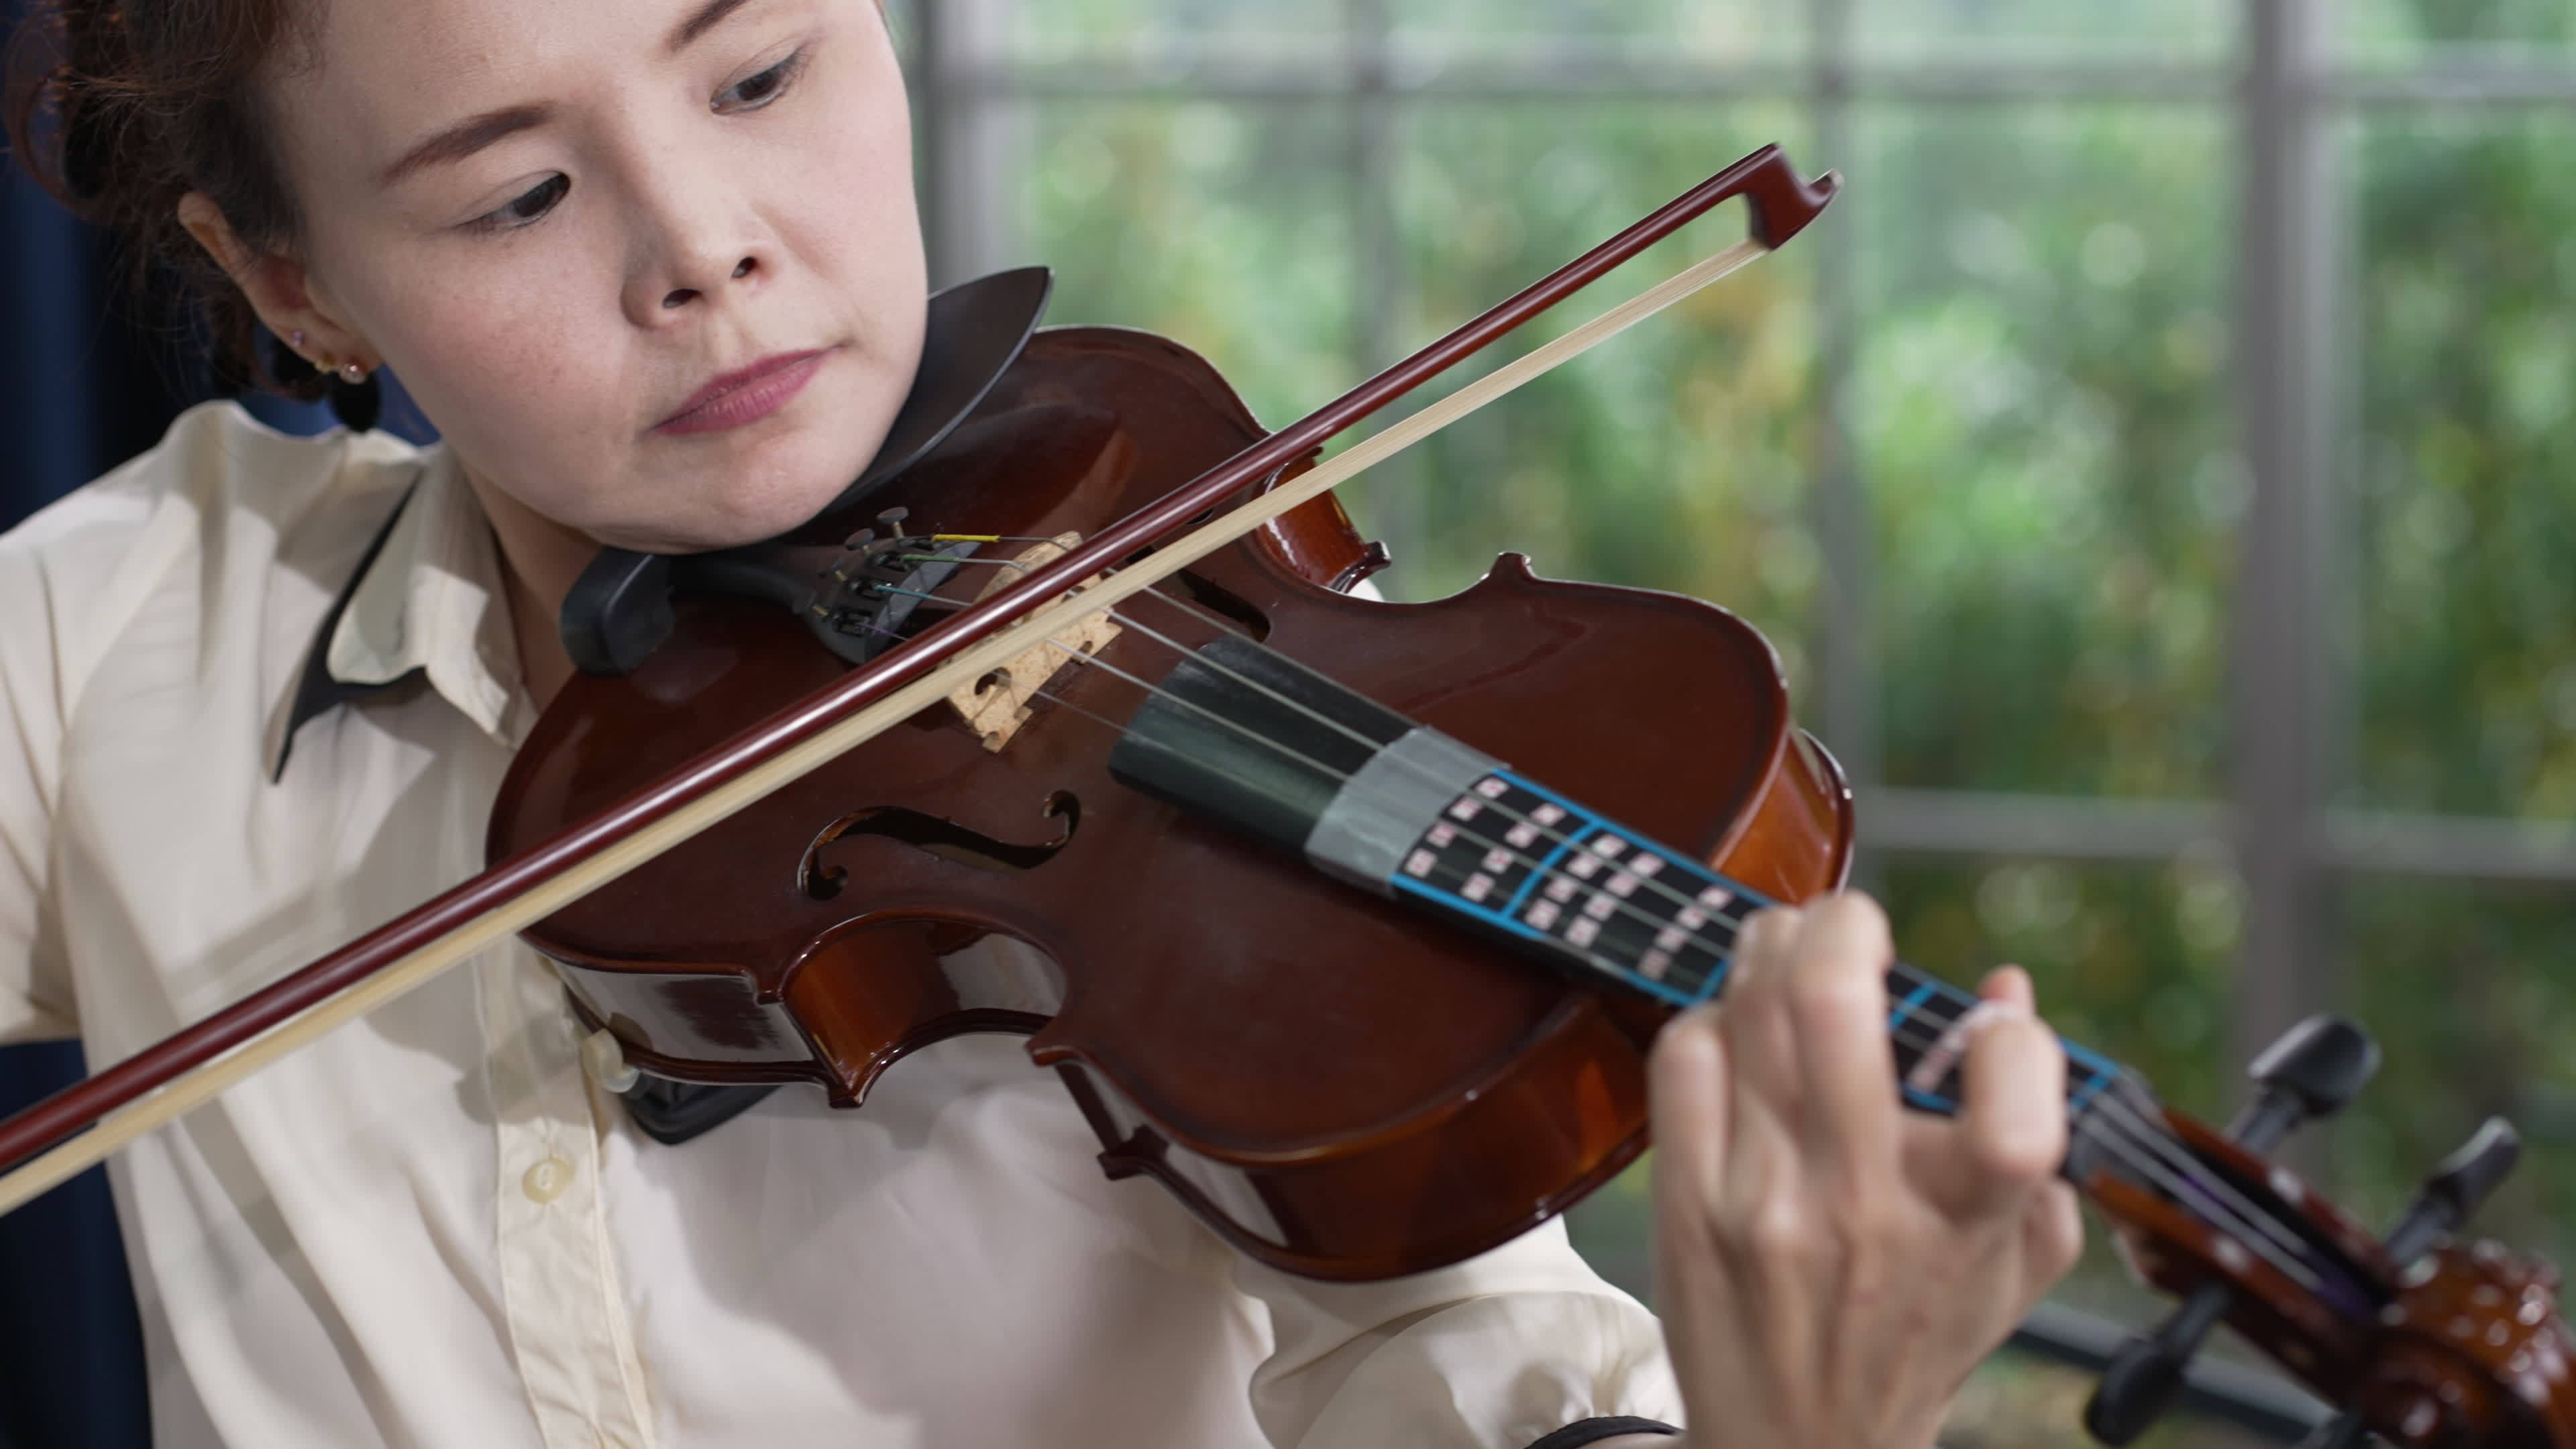 Violin: String Onstrument, Violin Set Up In The Manner Of The Baroque Period Of Music, Bowing The Strings. 3840x2160 4K Wallpaper.